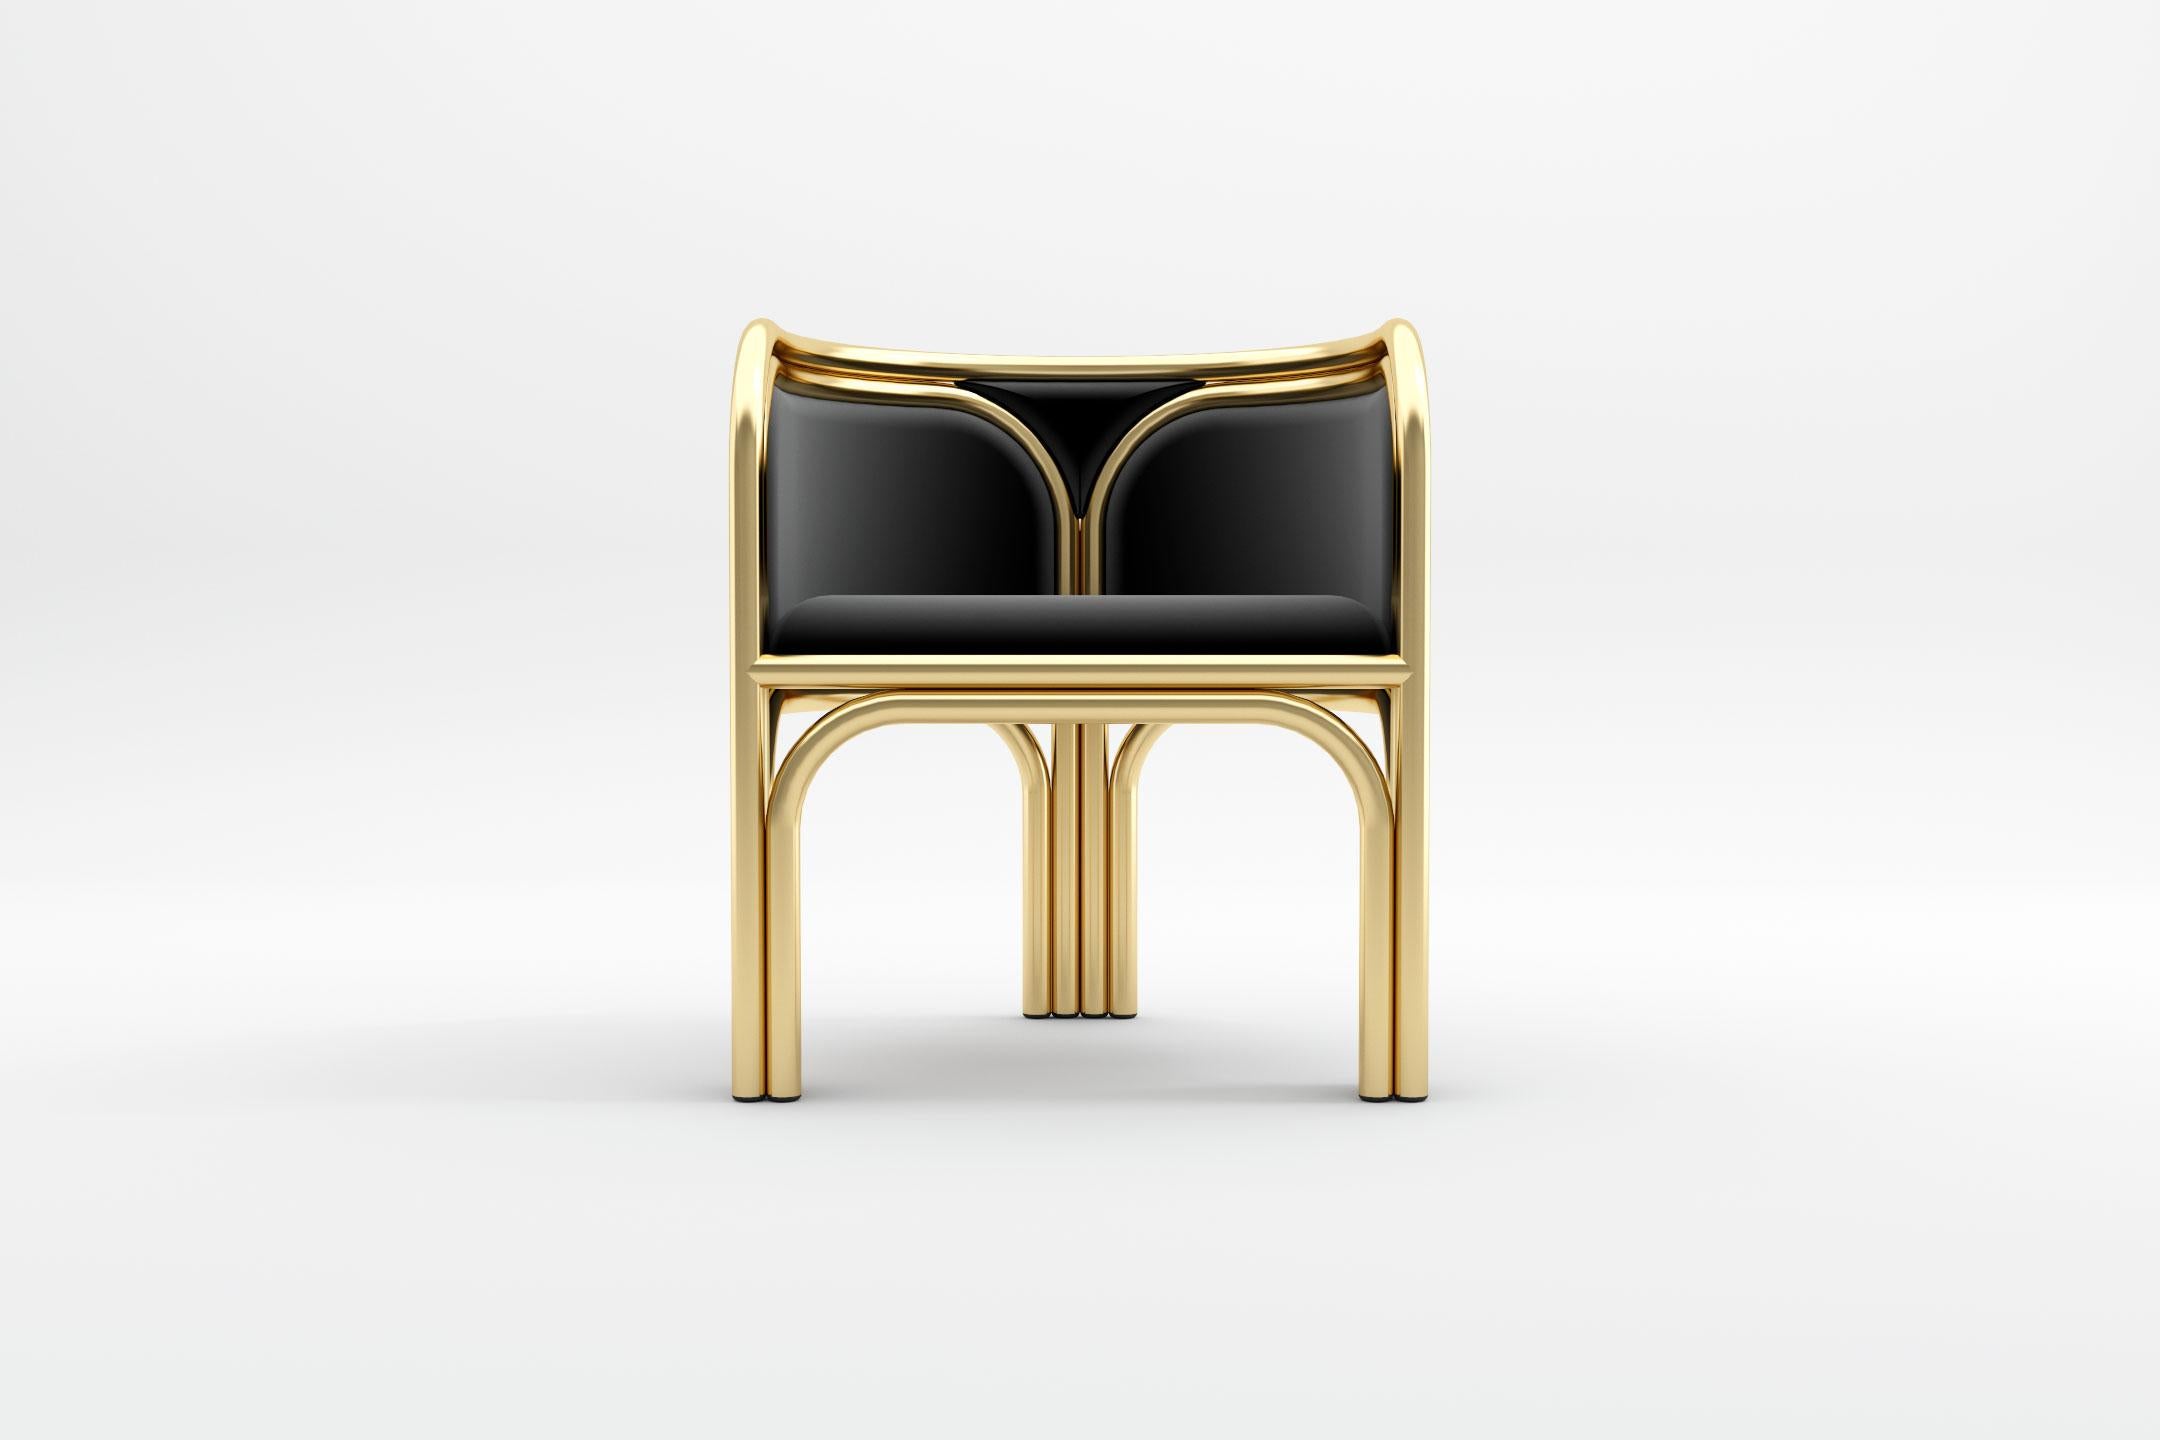 Taking a glimpse into the past, the Gatsby collection takes us back into an era of opulent splendour and wondrous beauty by simply laying our eyes on its magnificent curves. The piece was designed and manufactured by Prieto Studio, a furniture